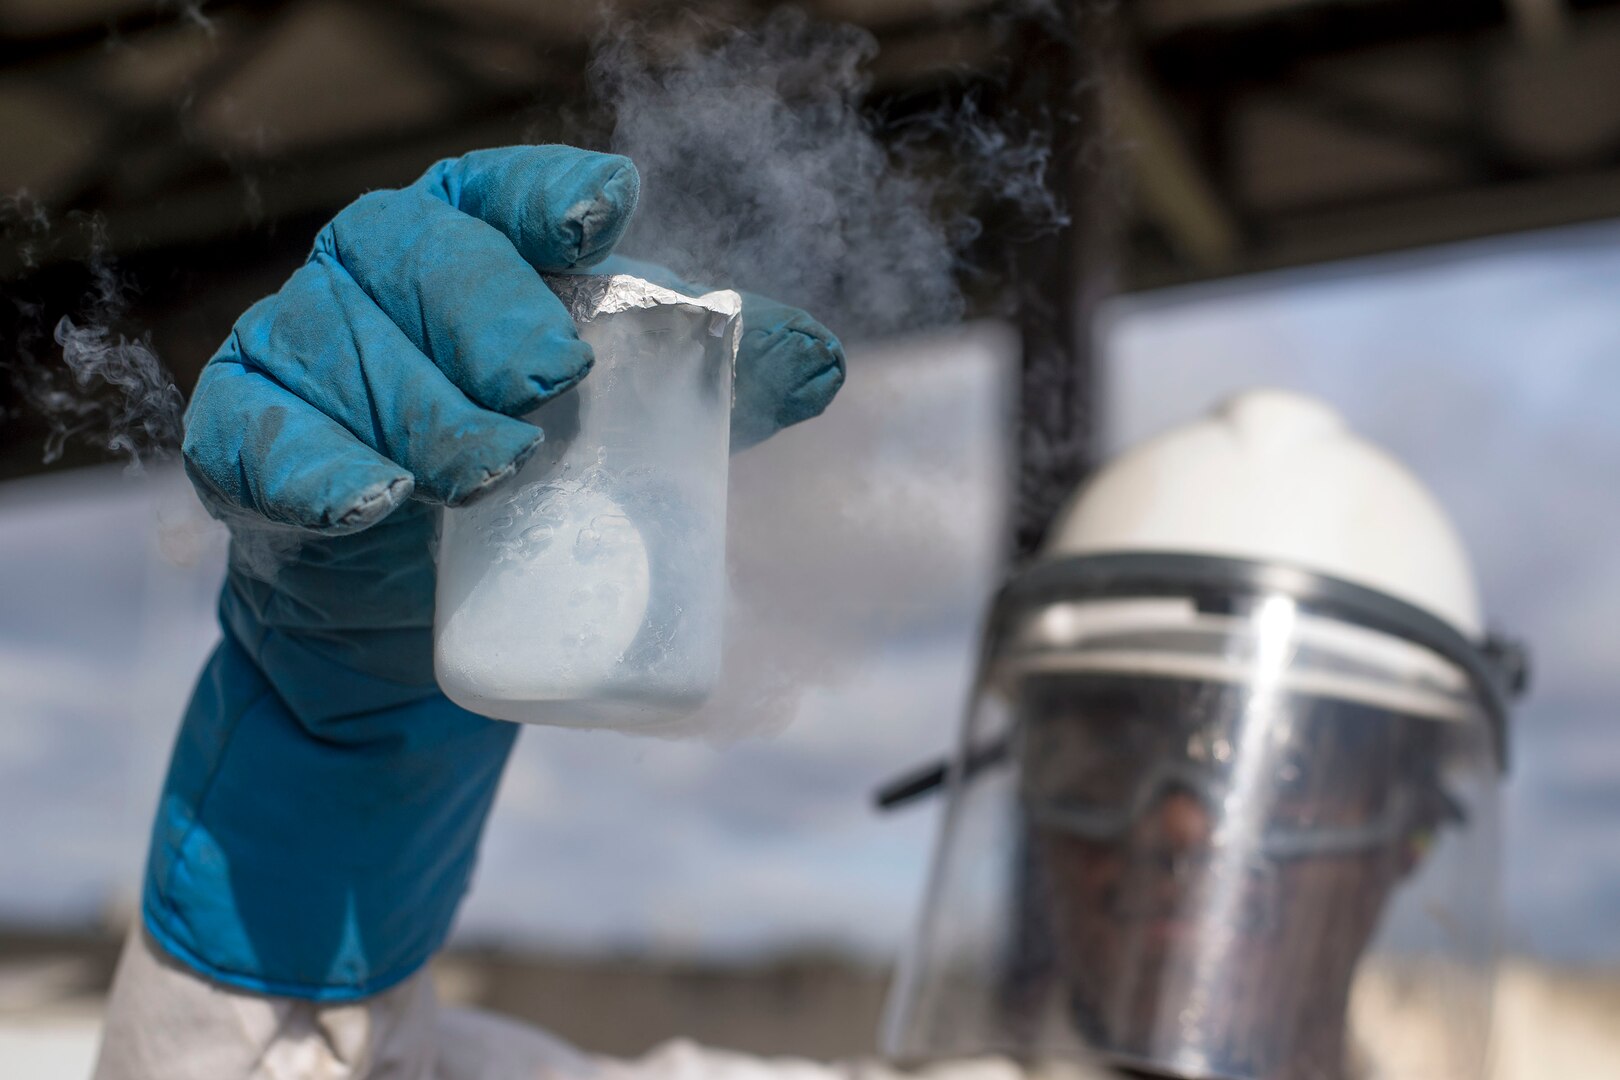 U.S. Air Force Senior Airman Kameron Ware, 100th Logistics Readiness Squadron Fuels Facilities operator, tests 200 milliliters of liquid oxygen at RAF Mildenhall, England, Oct. 2, 2018. Facilities Airmen wear protective equipment while testing liquid oxygen due to the low temperature of - 297 degrees Fahrenheit. (U.S. Air Force photo by Staff Sgt. Christine Groening)